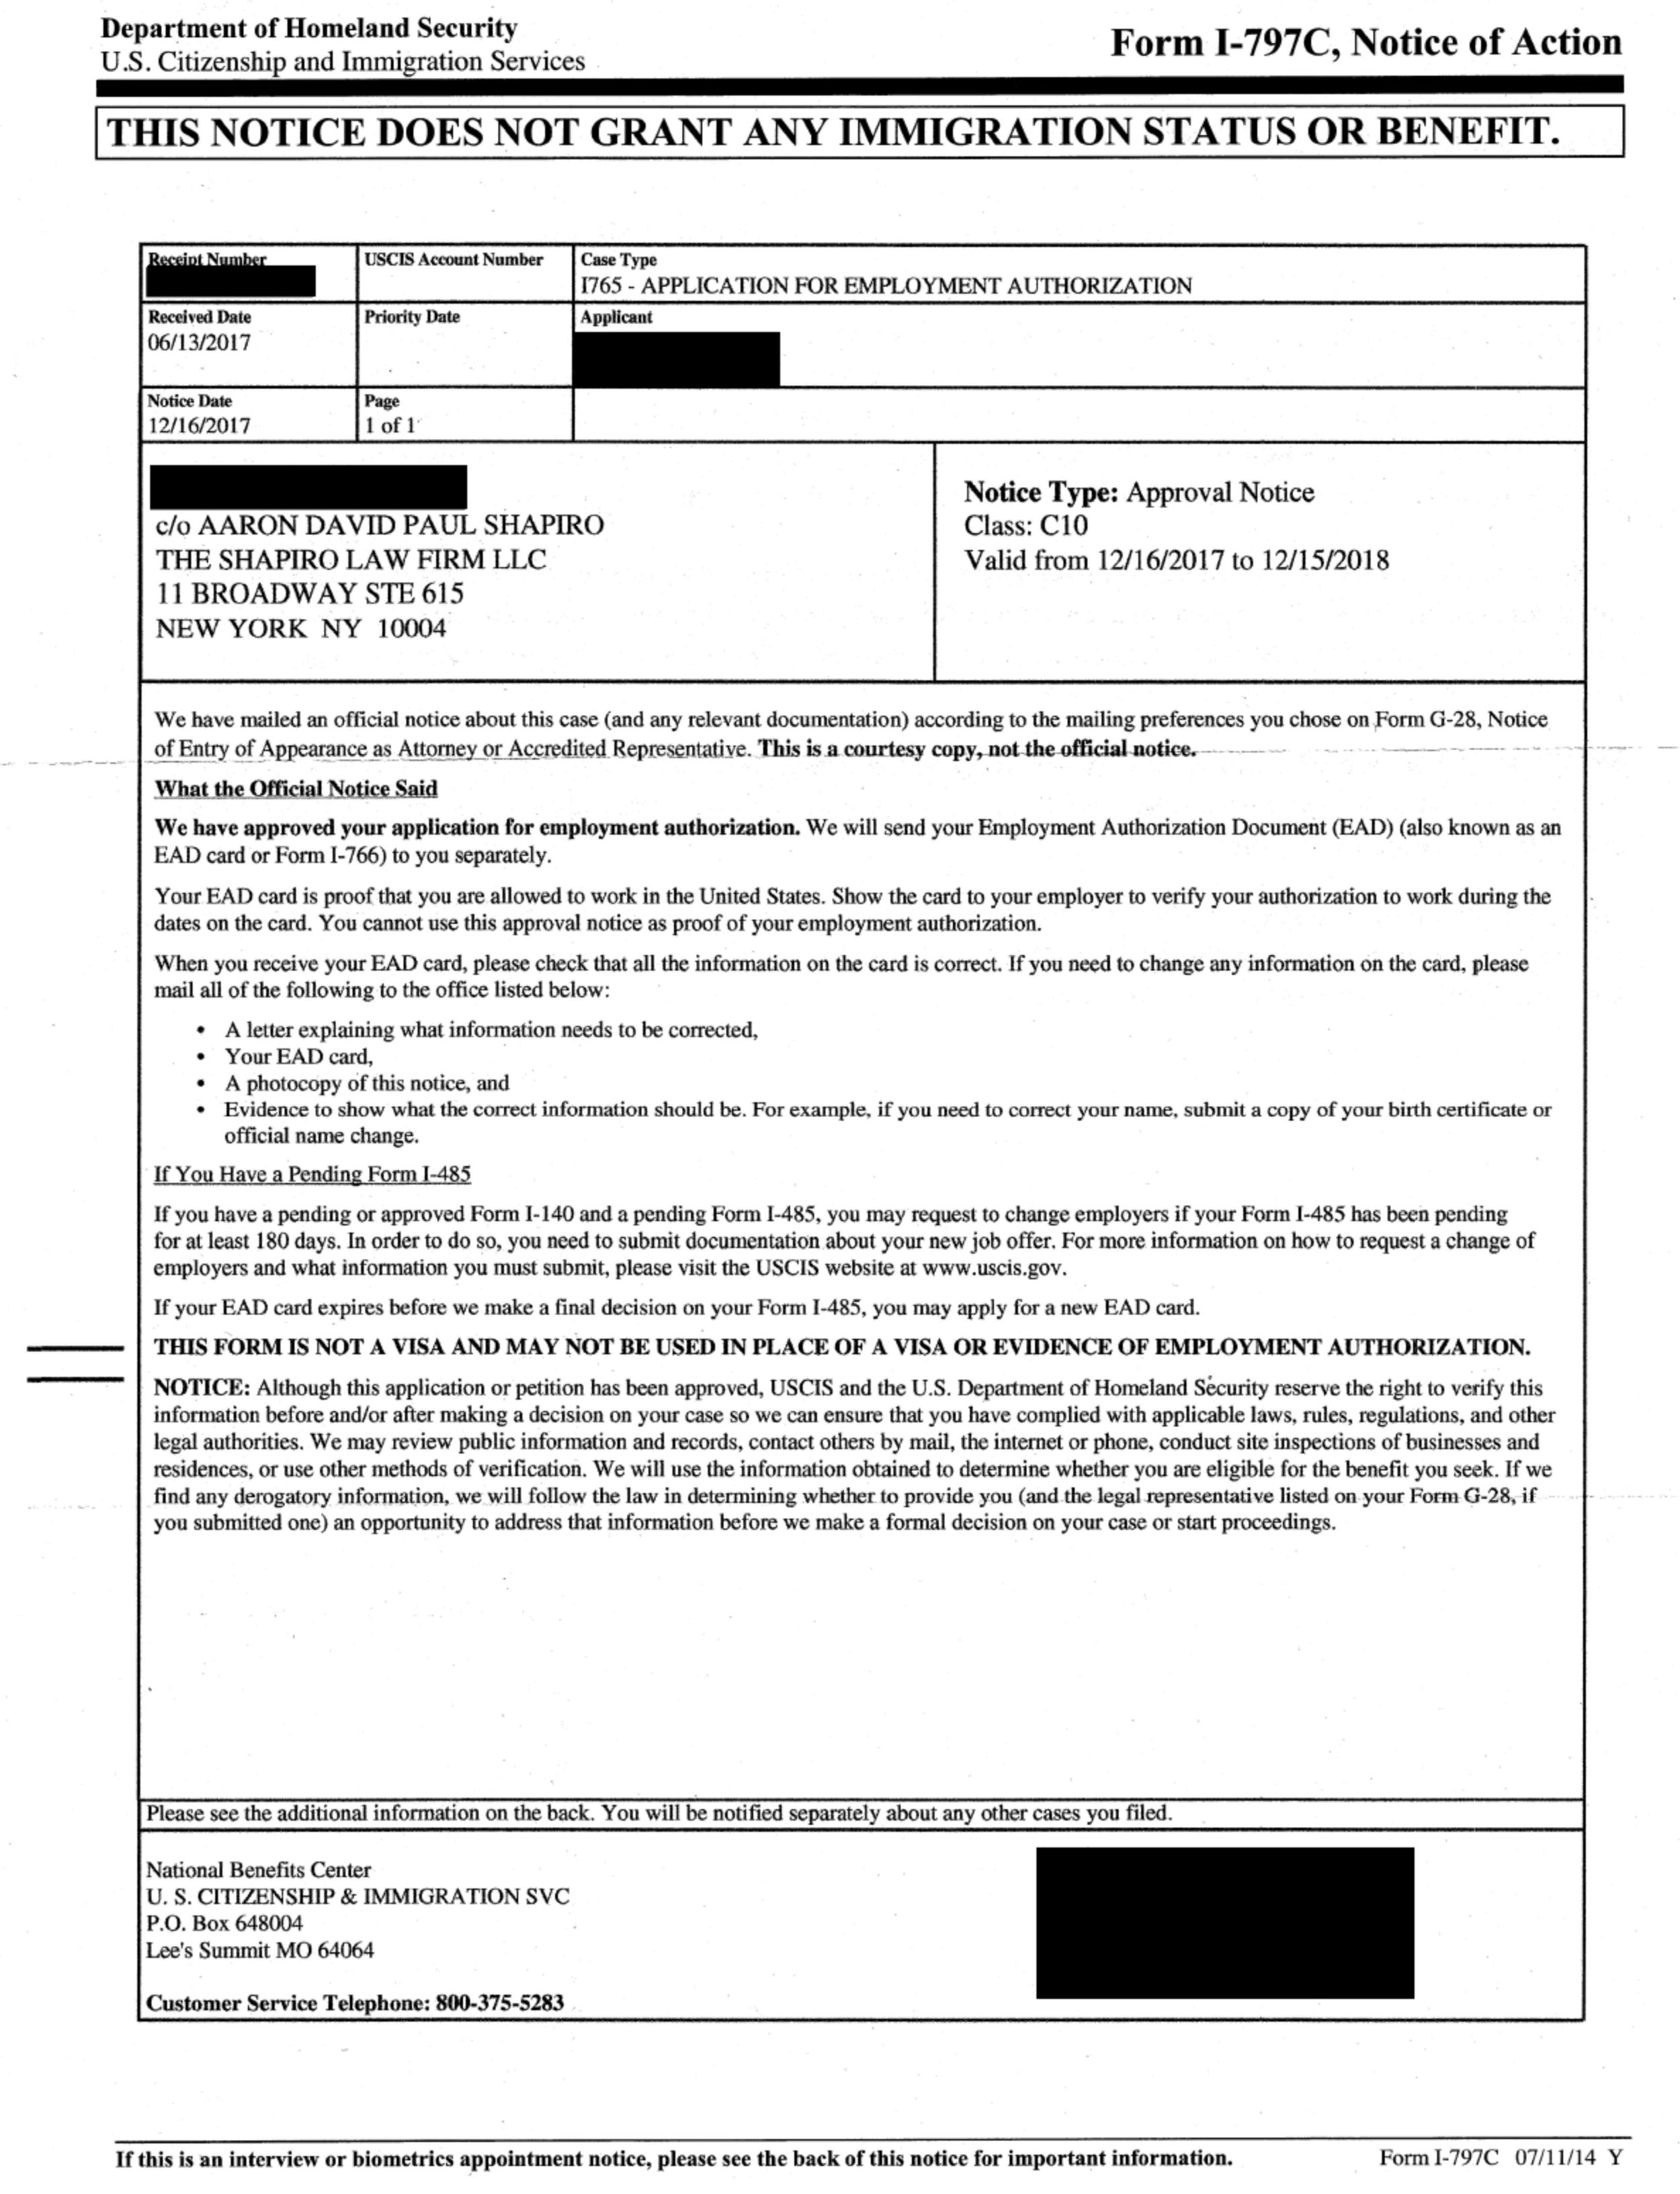 Form I-797C, Notice of Action - I-765 Approval Notice